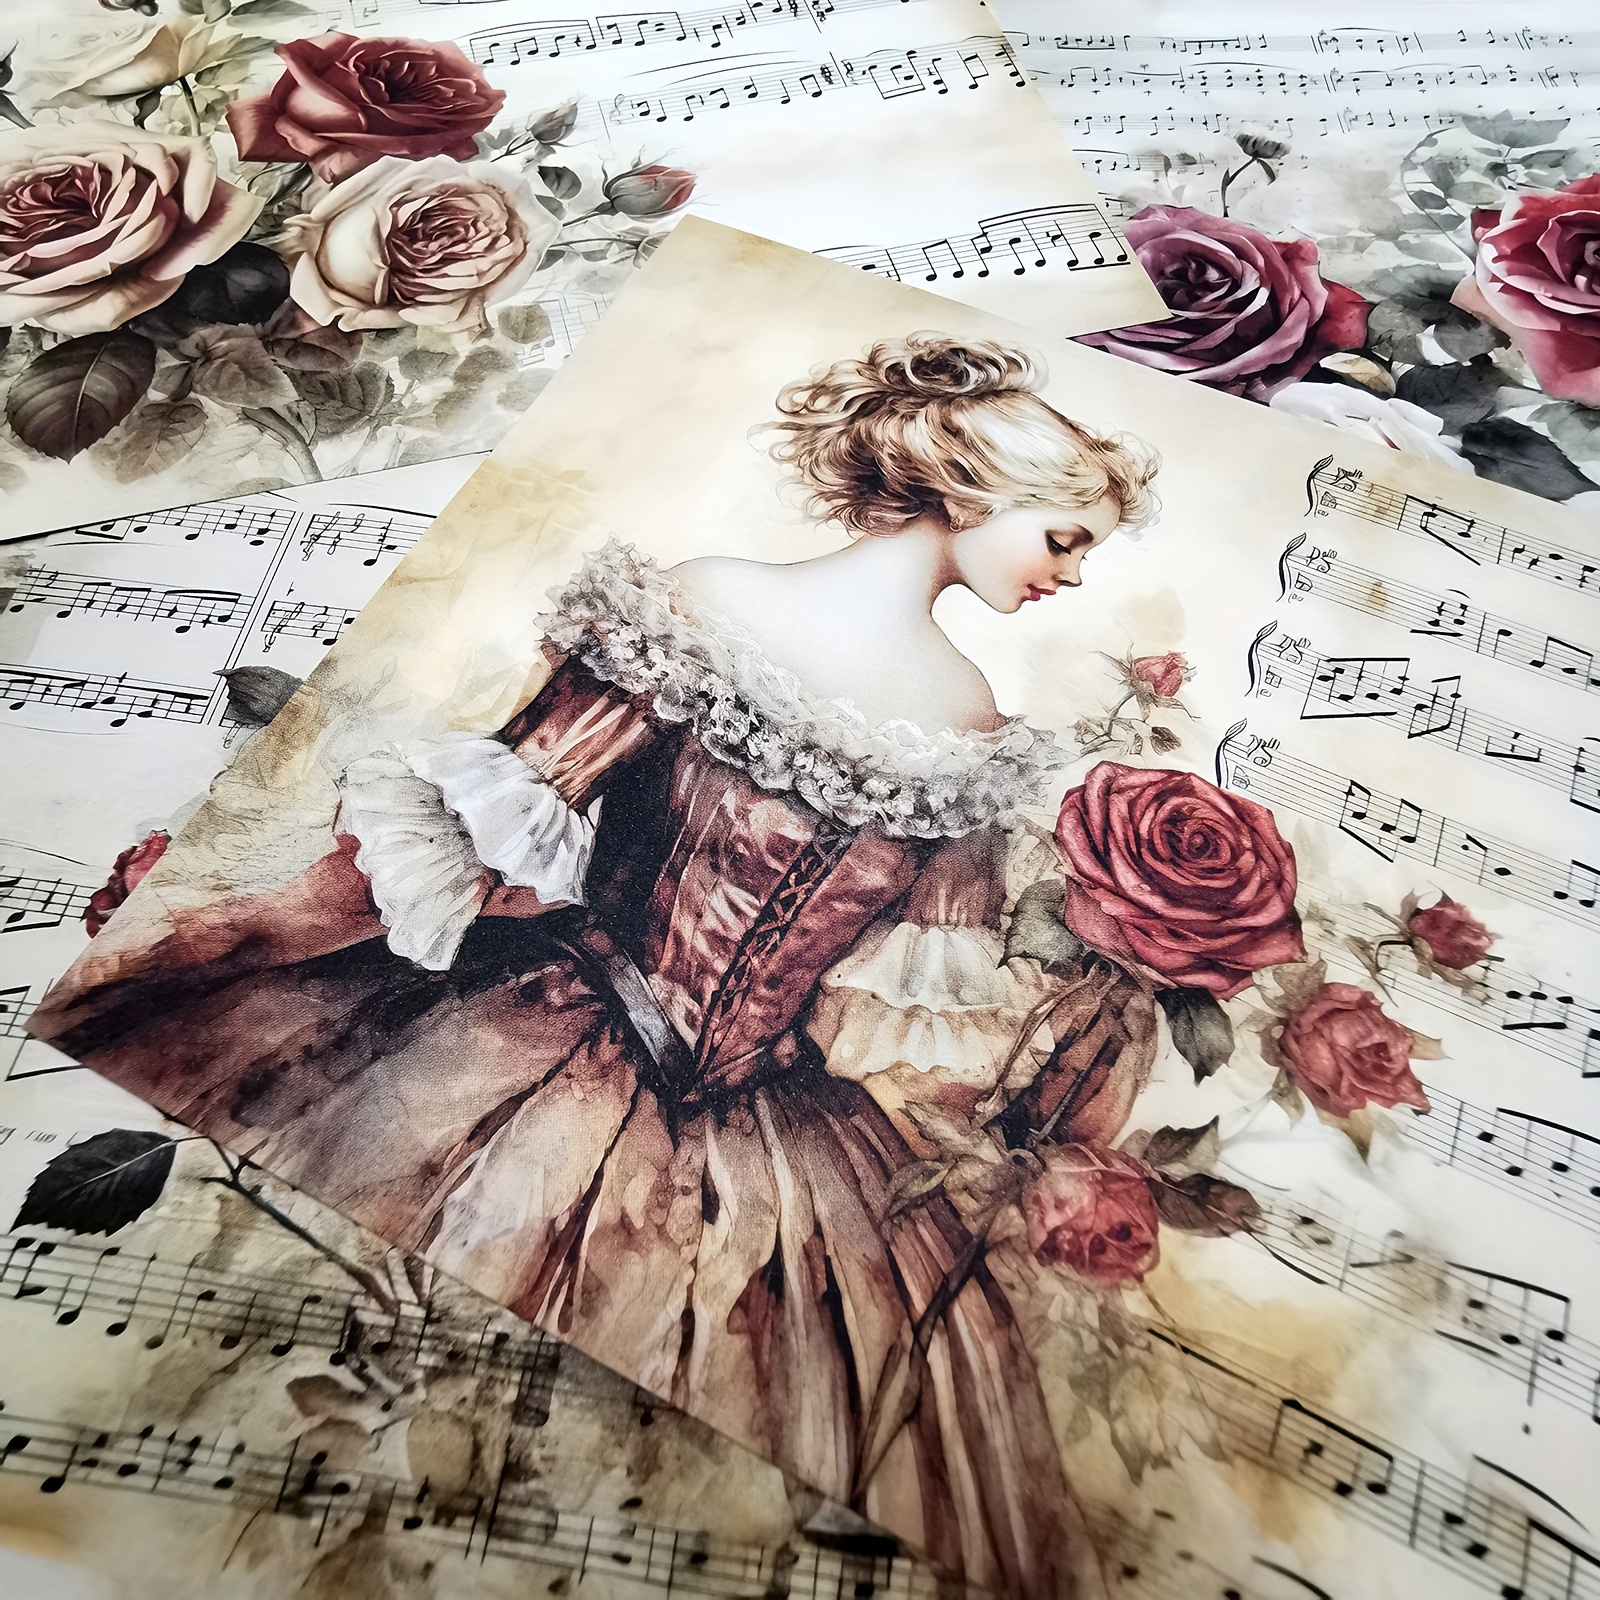 

Recyclable Watercolor Finish Craft Paper, 16 Sheets Vintage Rose And Dress Design, A5 Size Journal Scrapbooking Paper For Diy Arts And Crafts